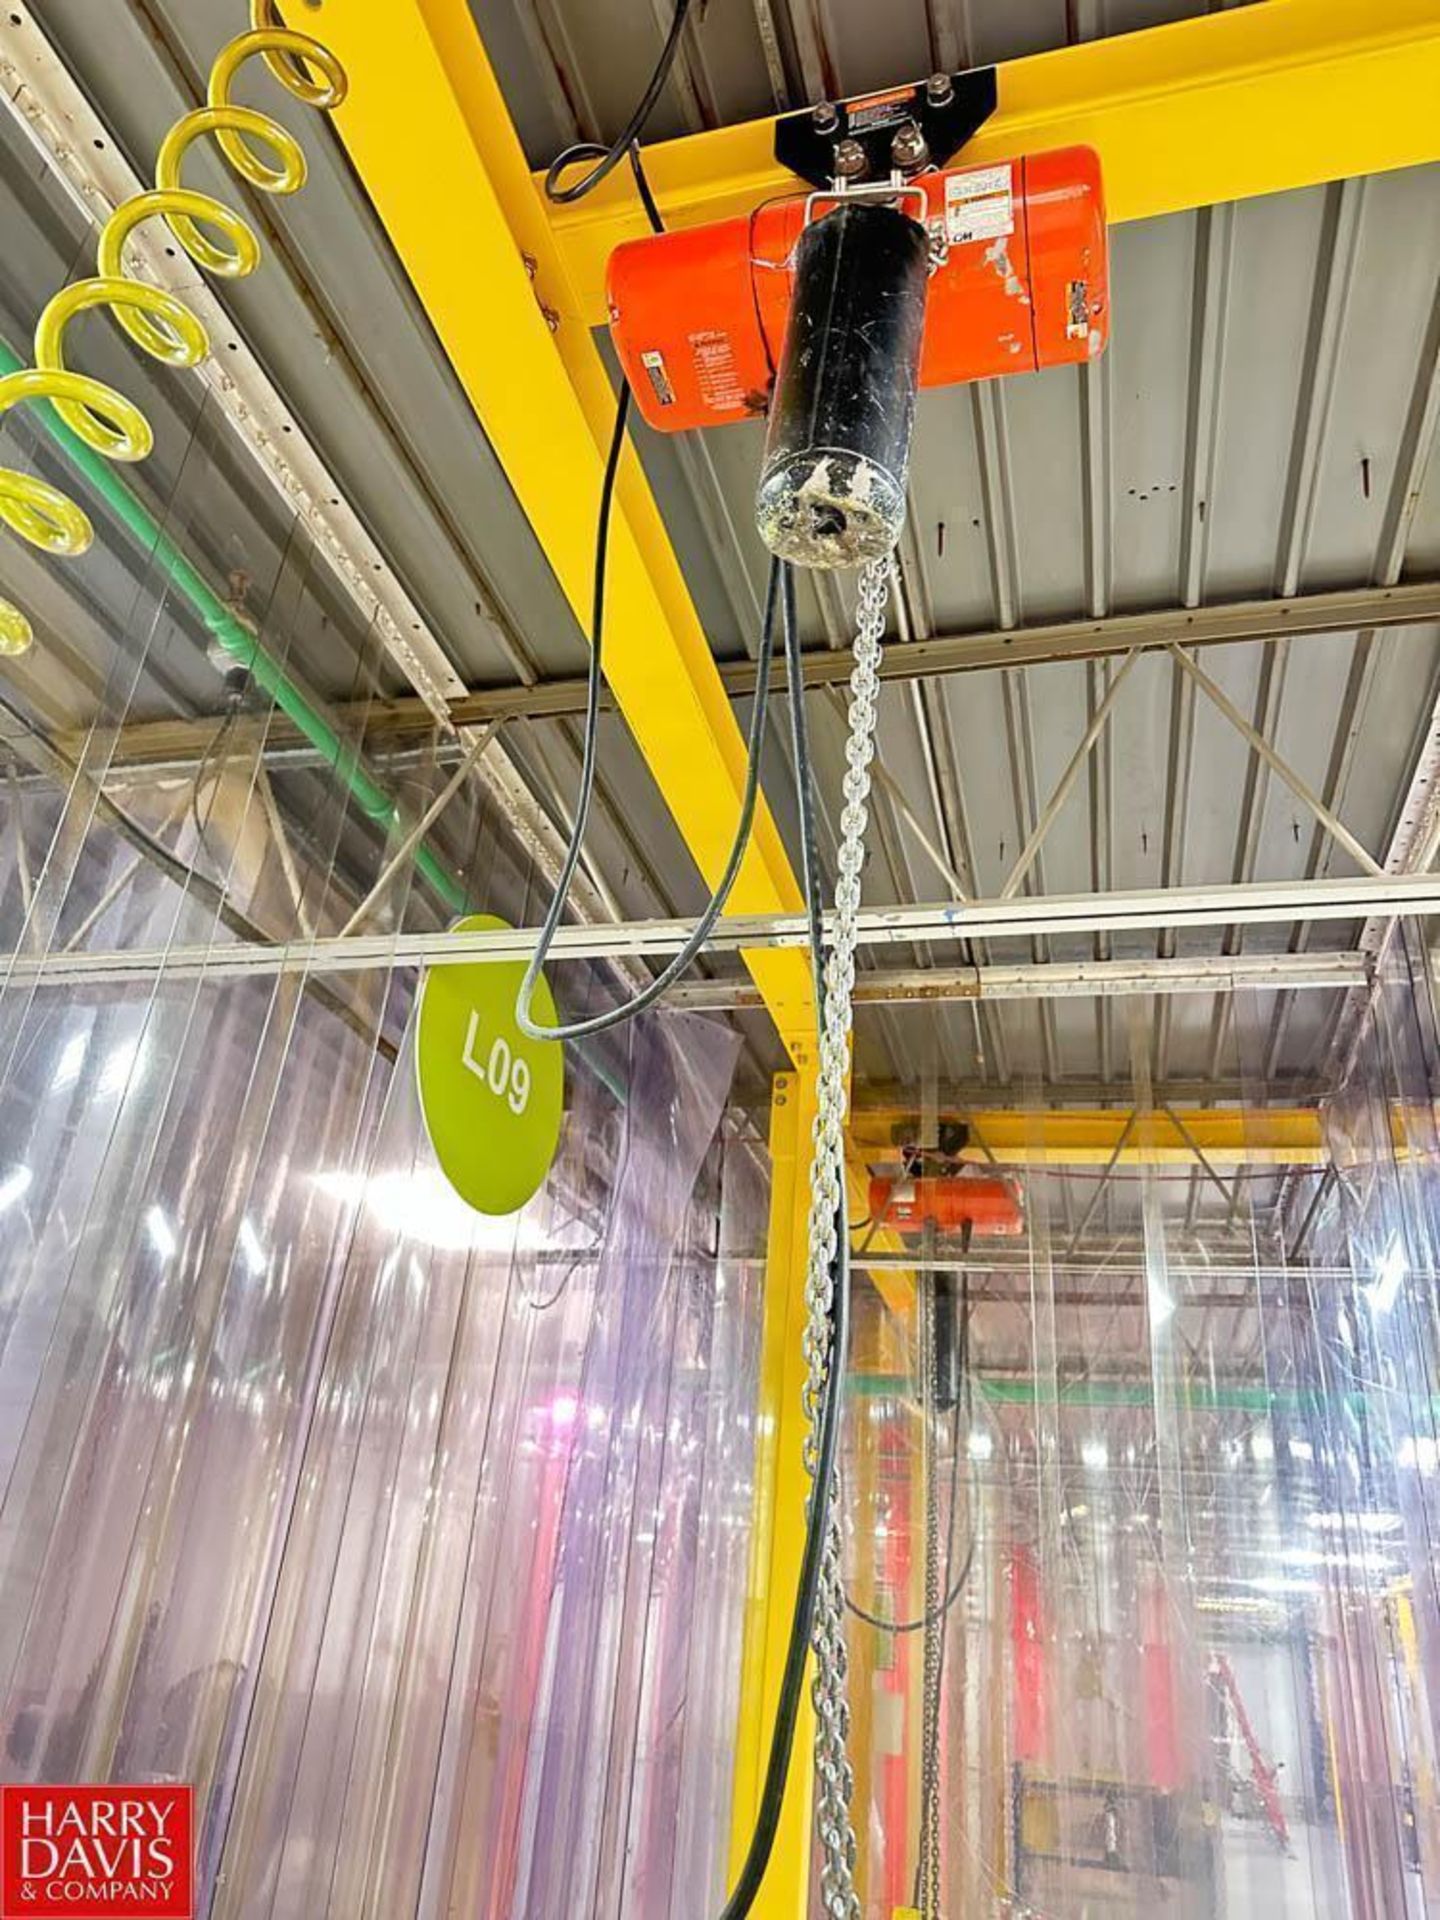 CM Lodestar 1 Ton Electric Chain Hoist with Gantry System - Rigging Fee: $750 - Image 2 of 2